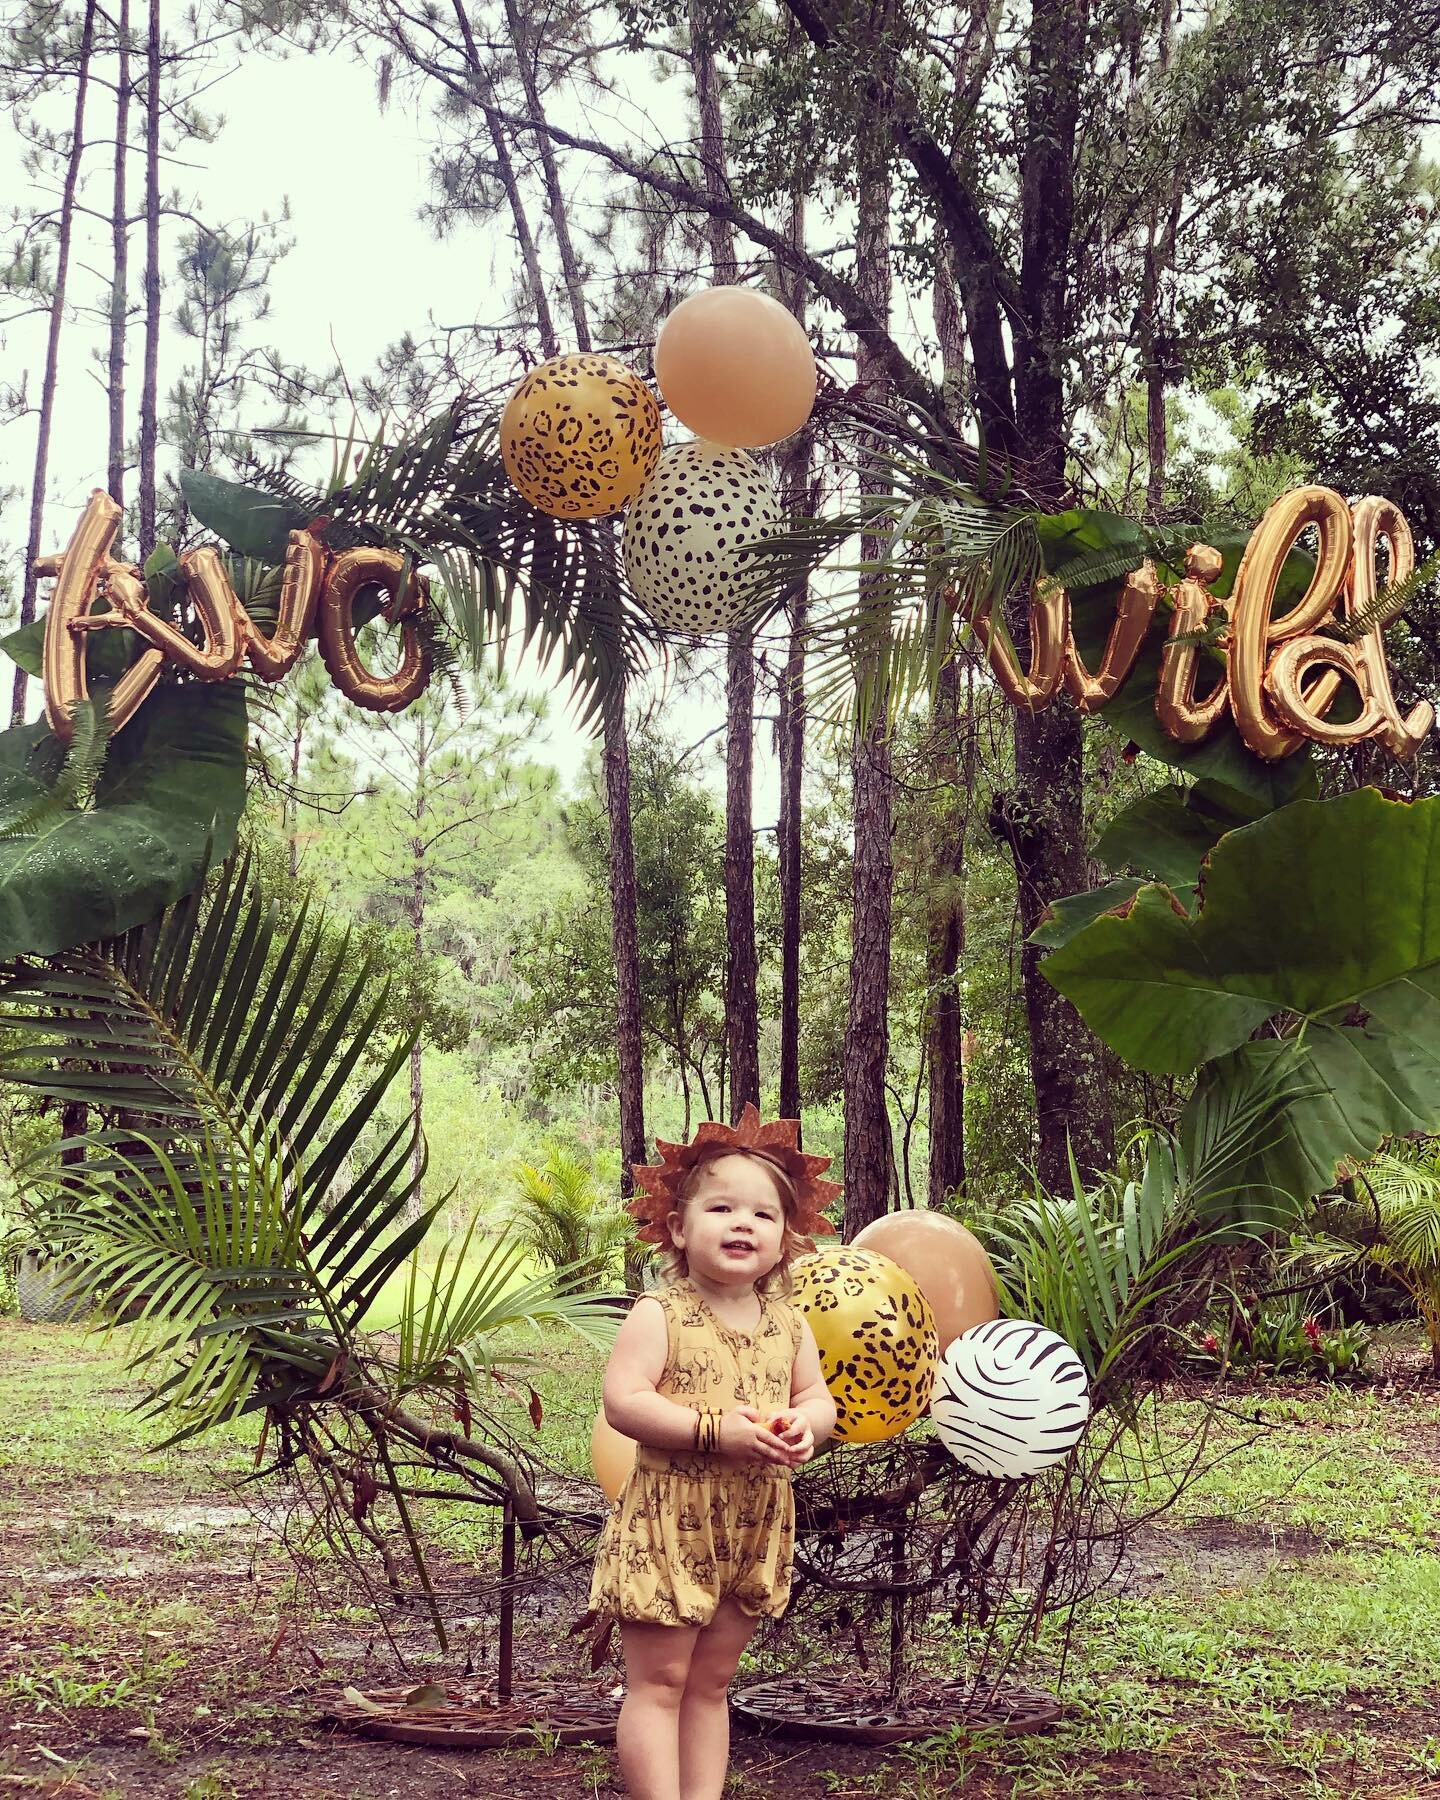 We had a blast hosting this little Lioness at Arrowhead Farms for her 2nd birthday, it was TWO WILD.😜

We would love to work with you to host your next outdoor celebration and bring your creative vision to life.✨